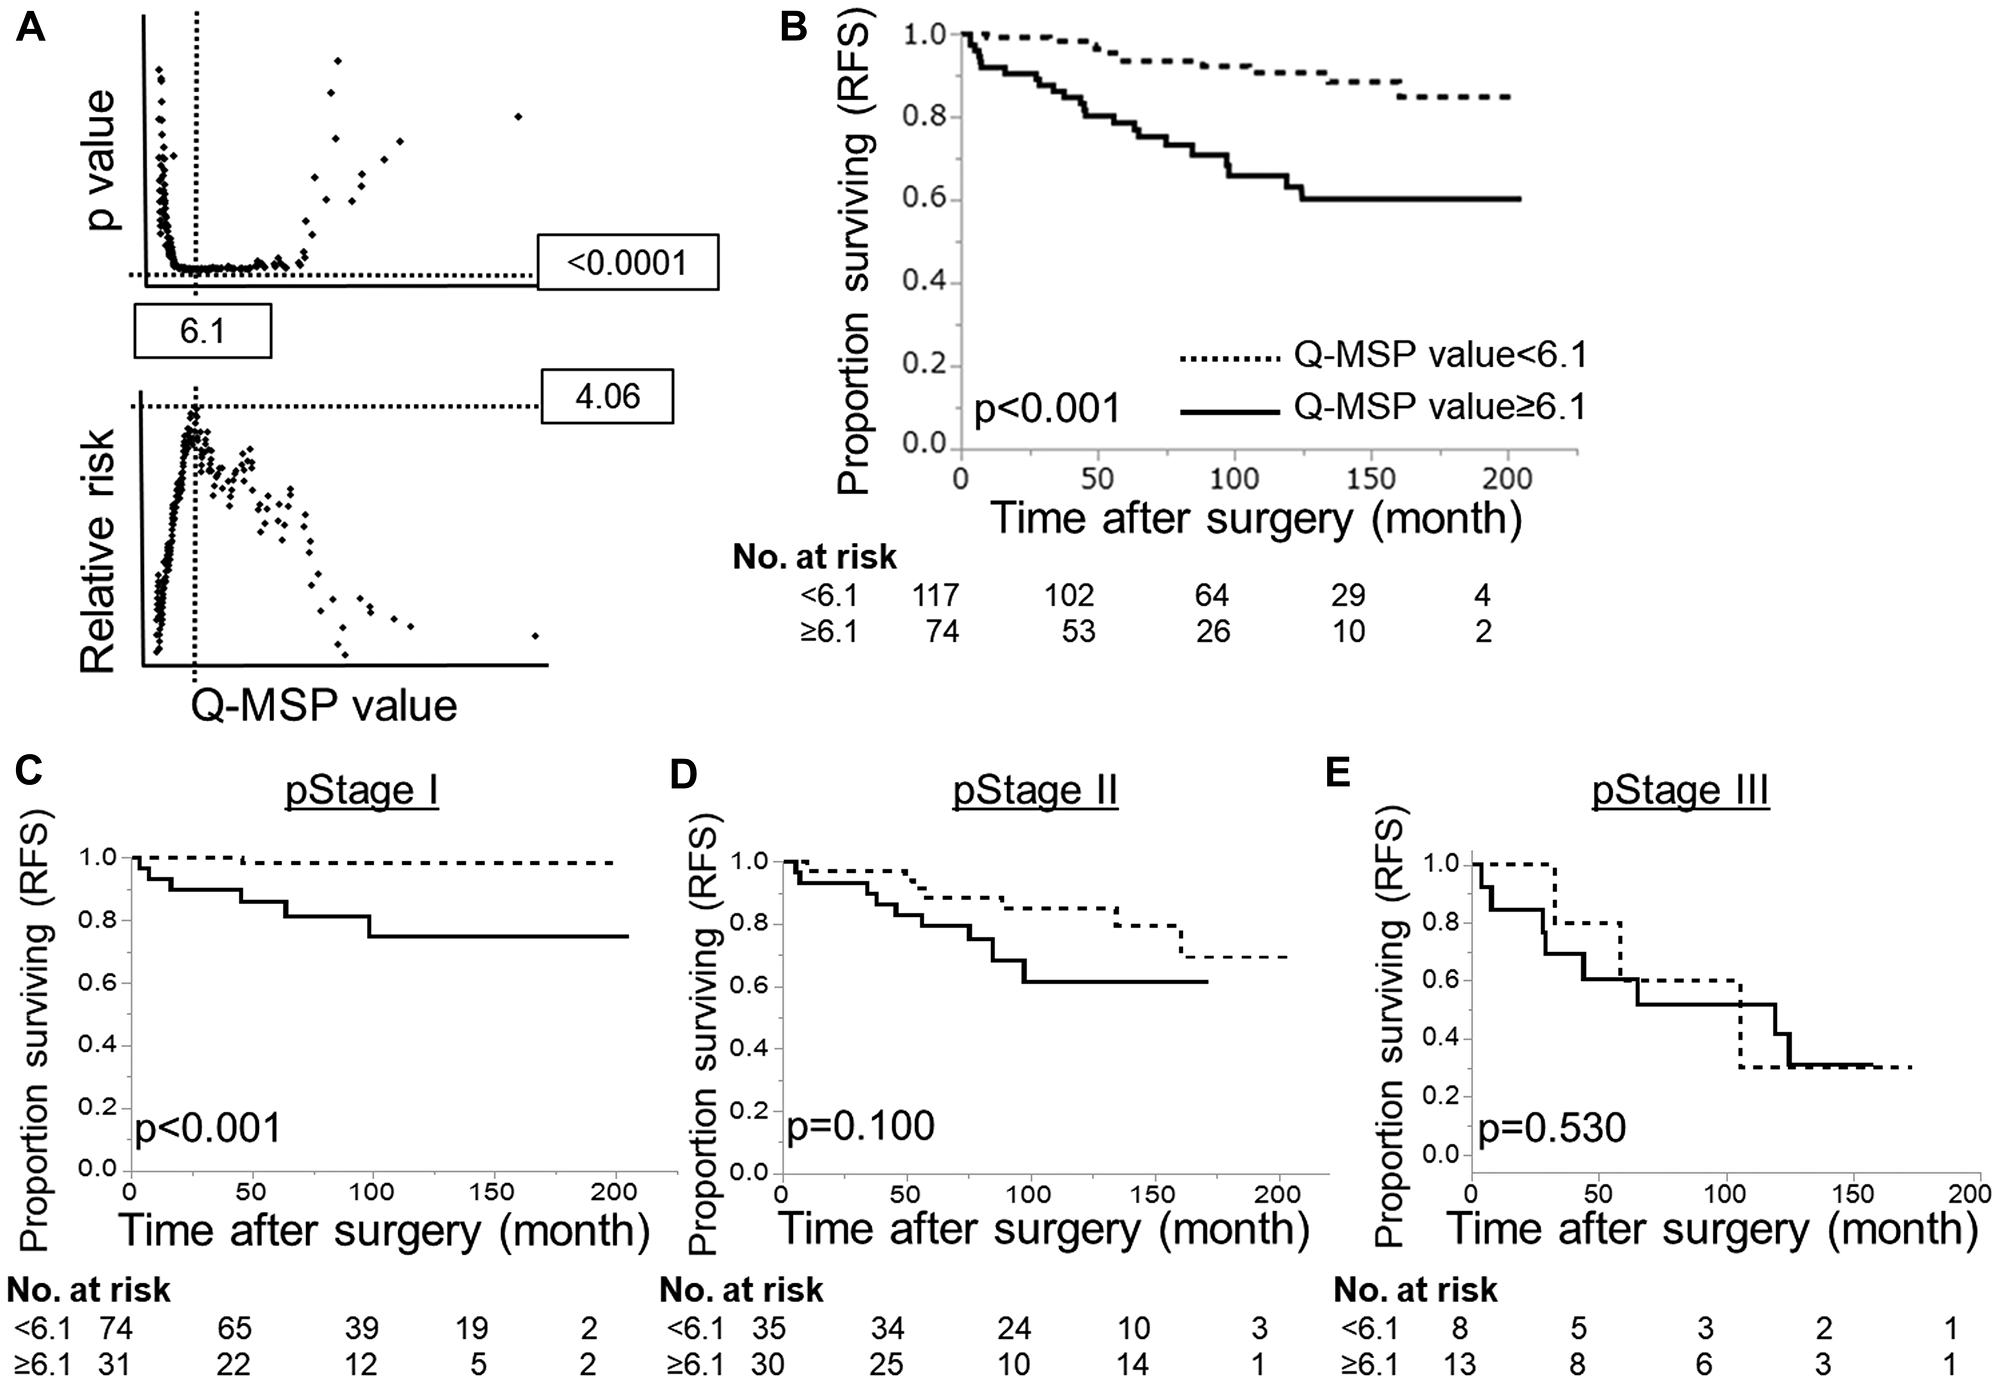 Prognostic implication of HOPX-β Q-MSP values in patients with PTC.